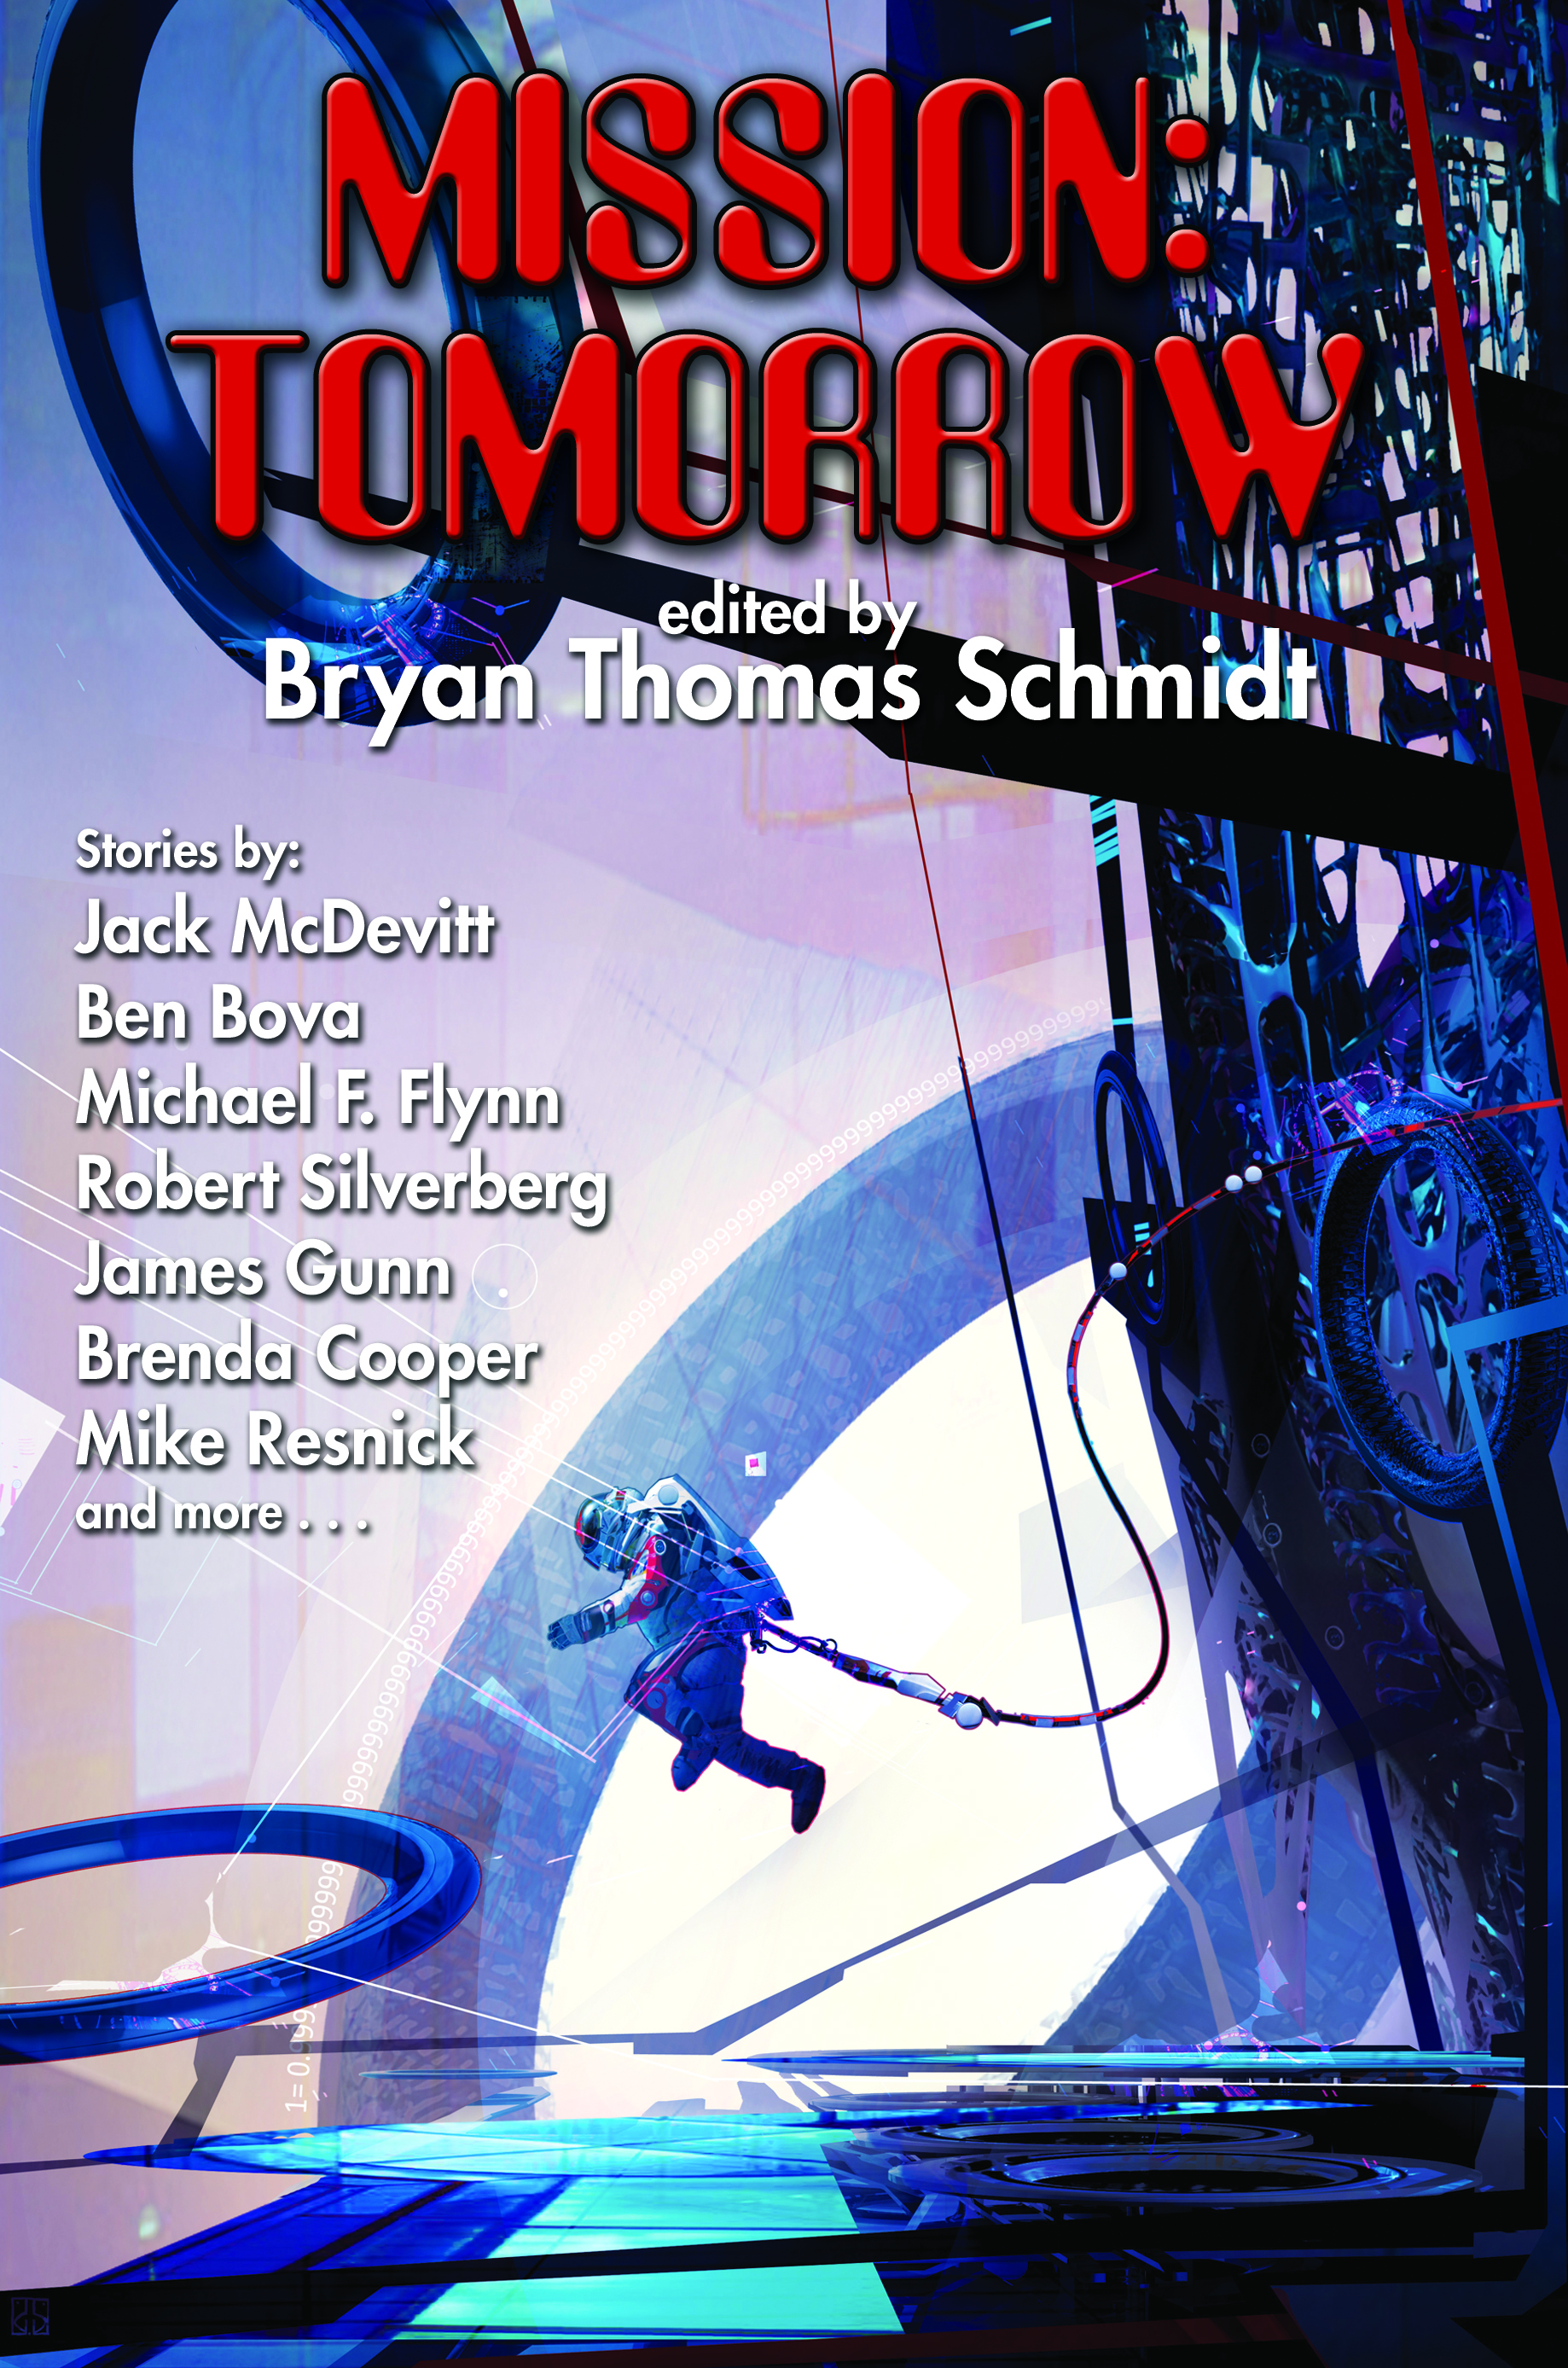 Mission Tomorrow edited by Bryan Thomas Schmidt - front cover from Baen Books